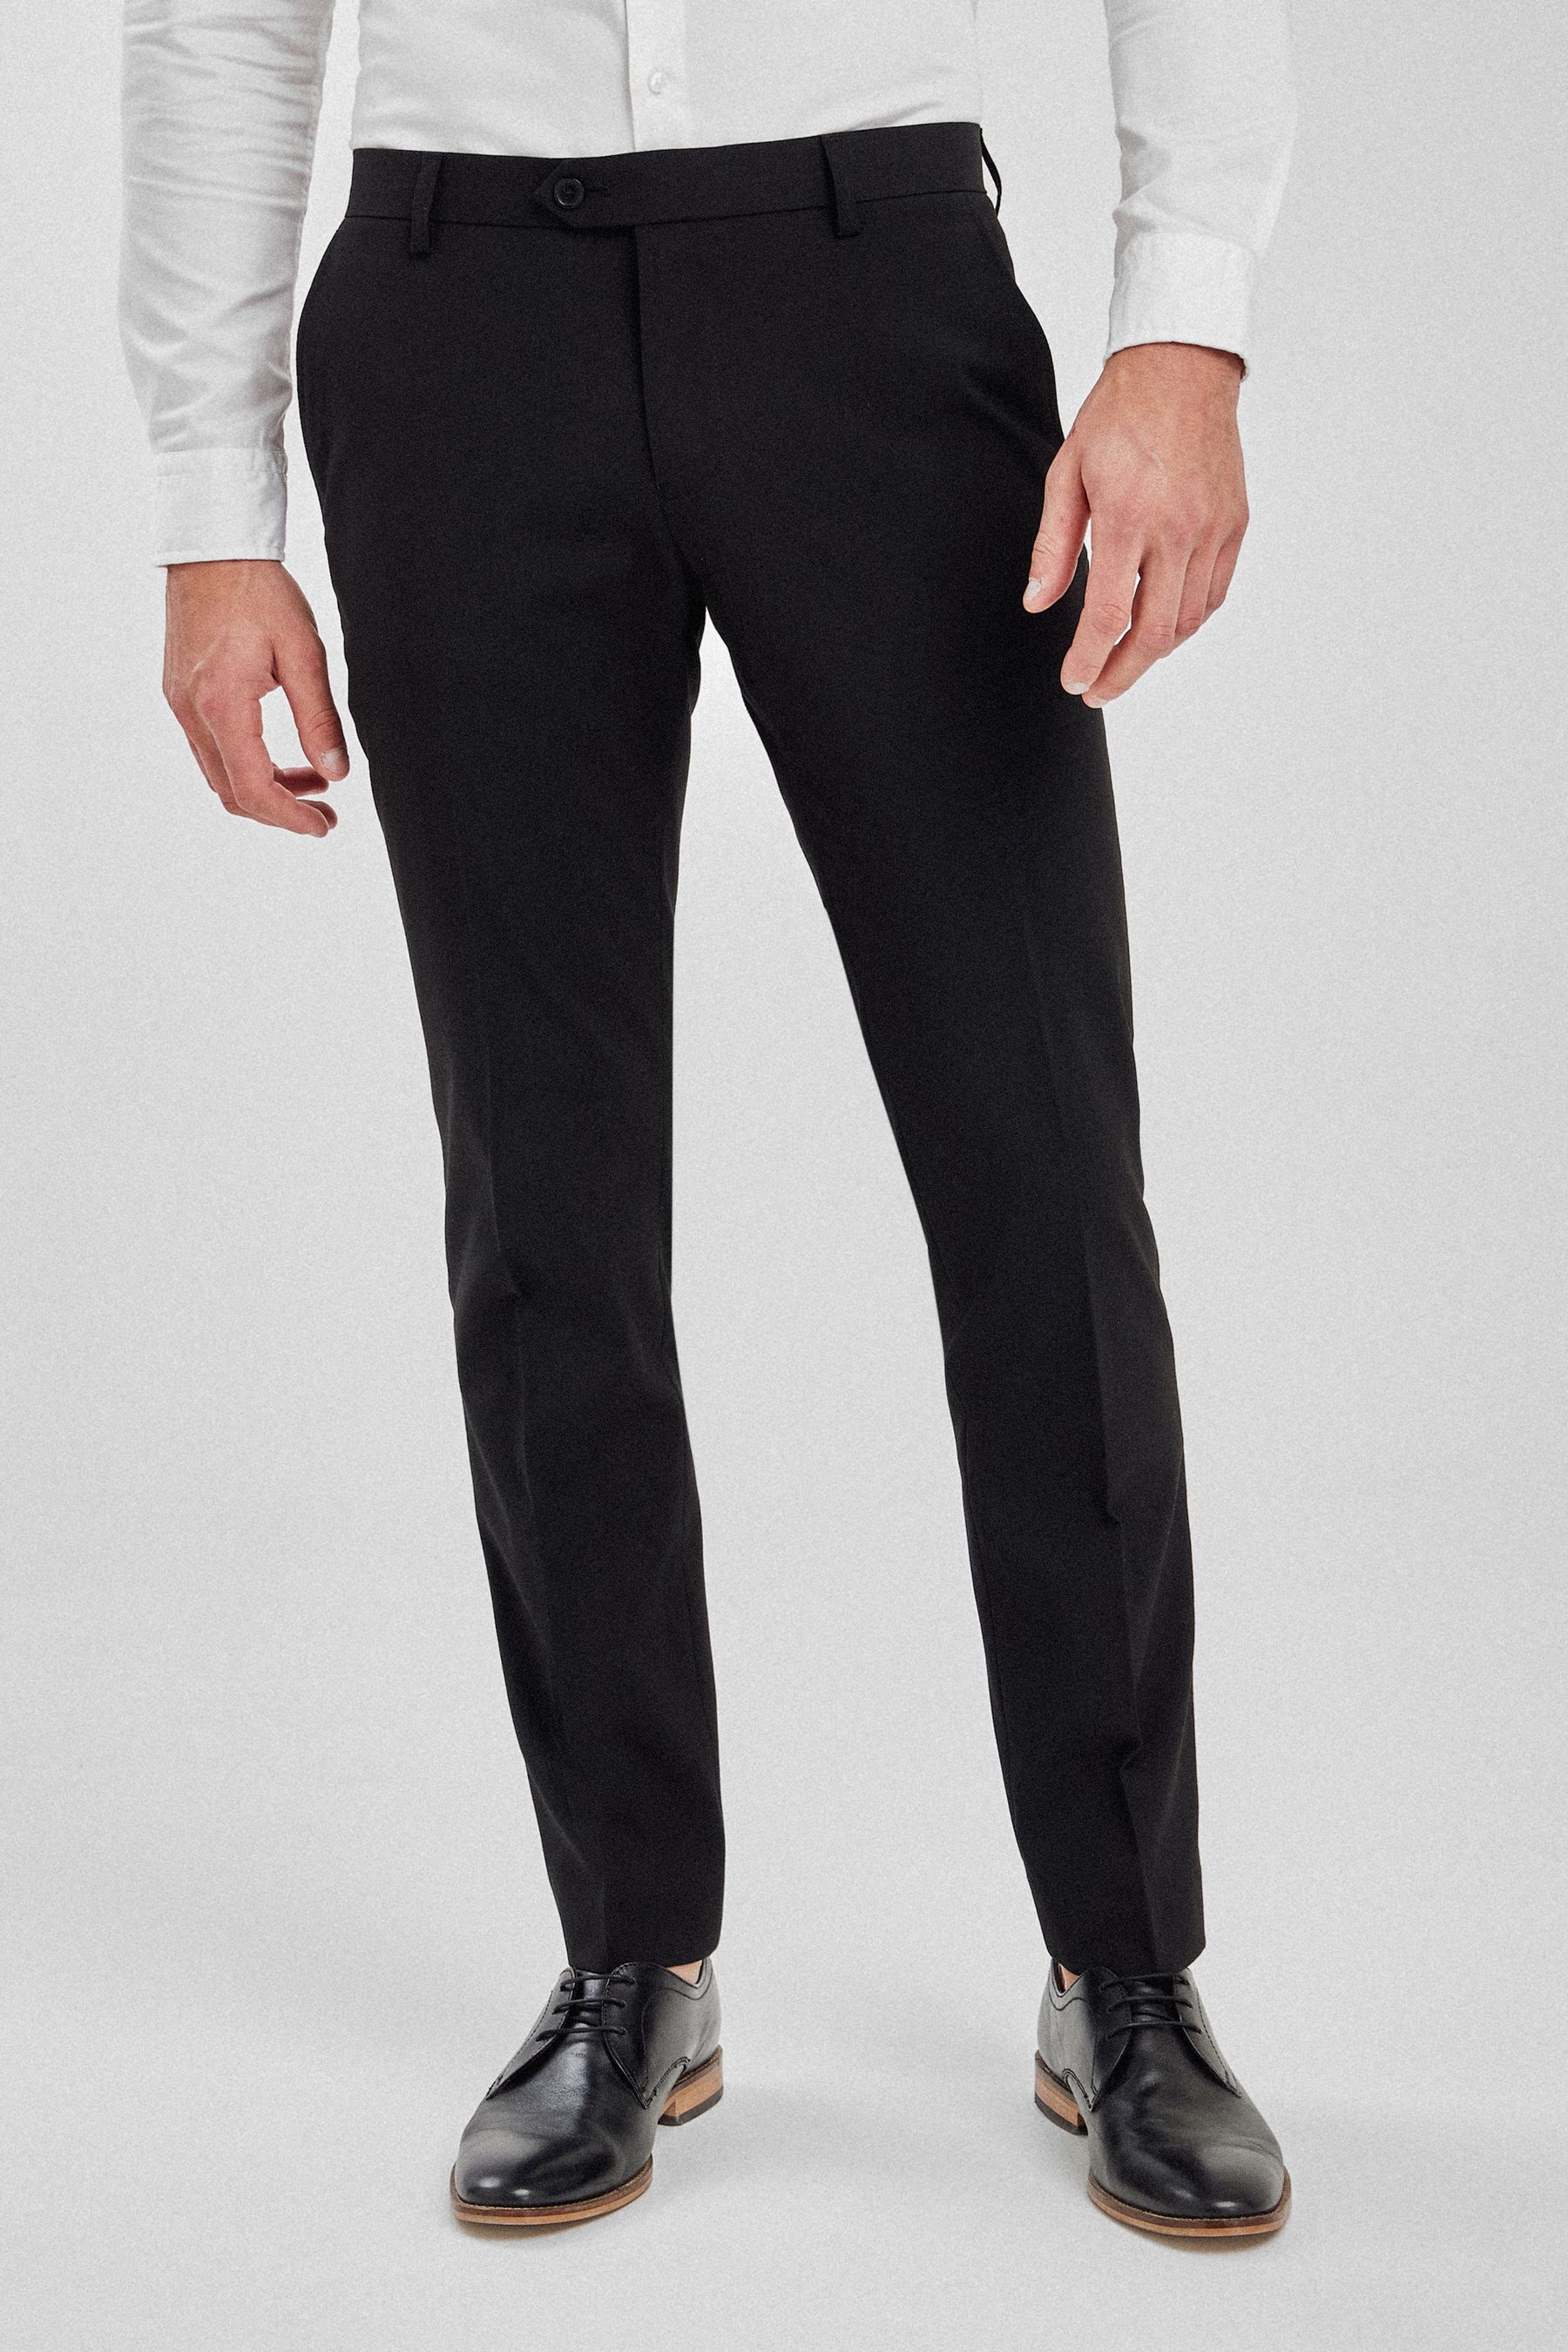 Buy Stretch Formal Trousers from the Next UK online shop